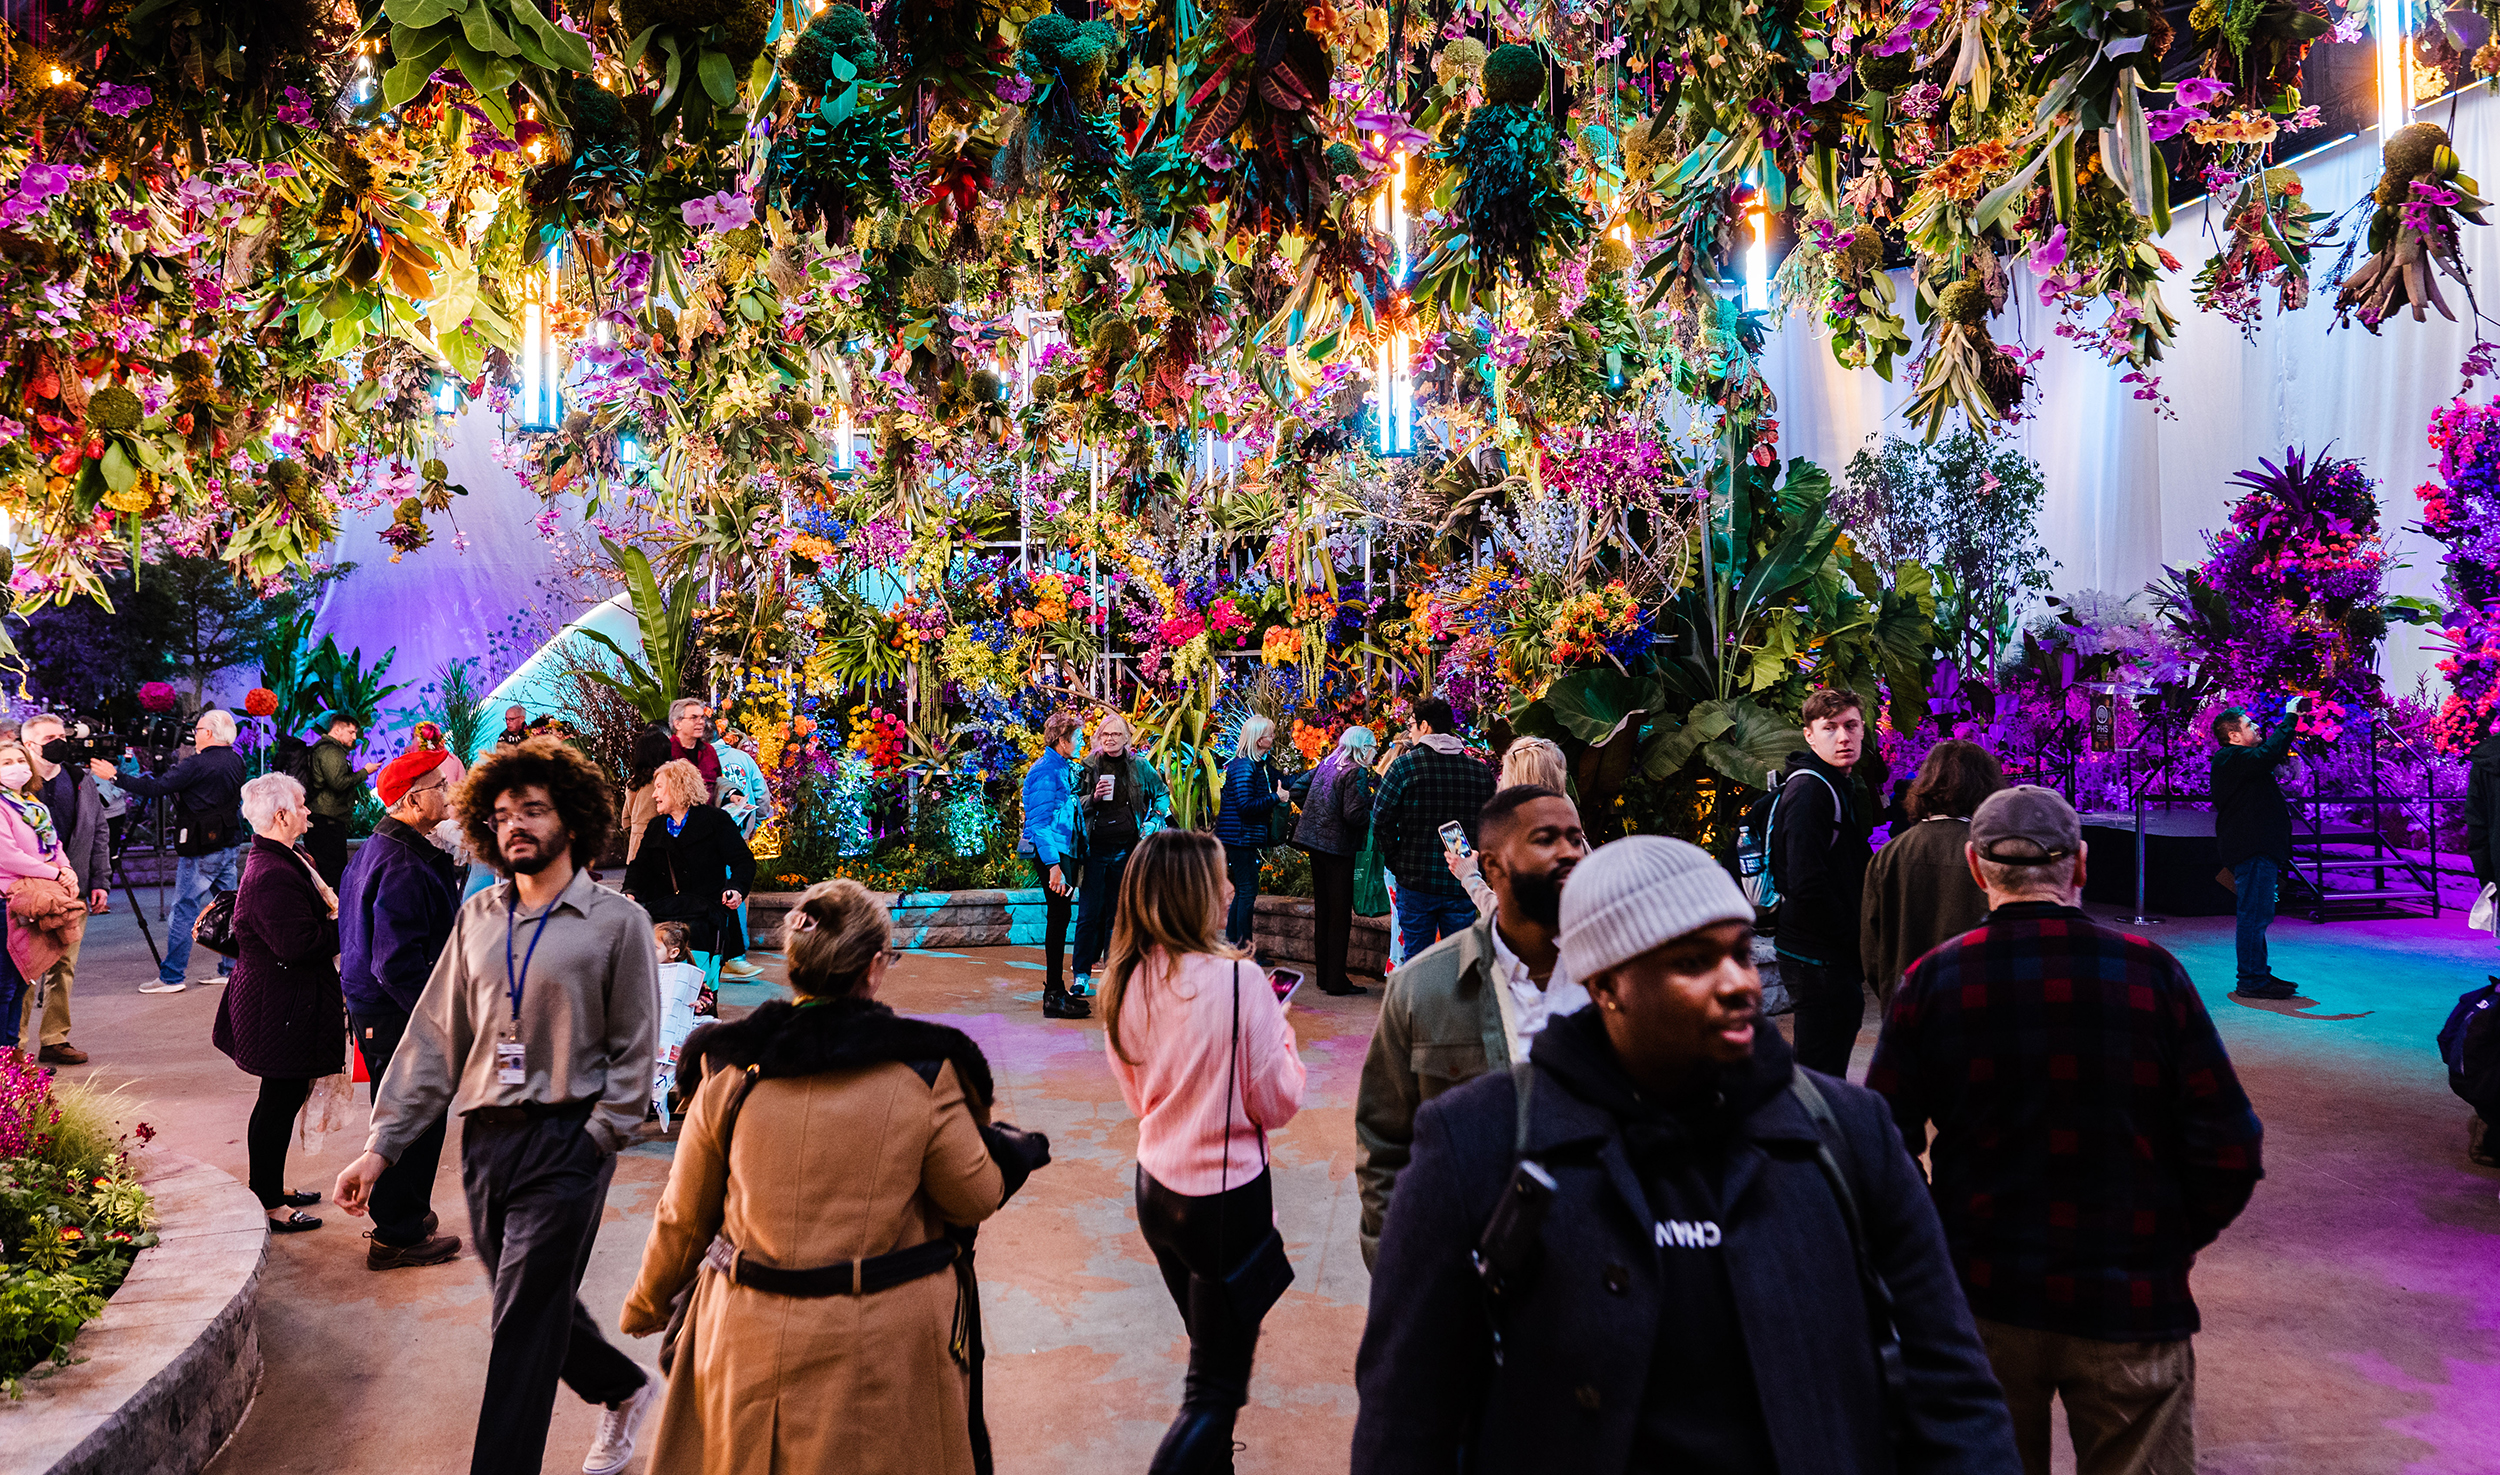 Bright, colorful floral arrangements hang from the ceiling. Flower Show attendees walk underneath, marveling at the floral displays surrounding them. A large floral display is in the center with a crowd of people admiring it.